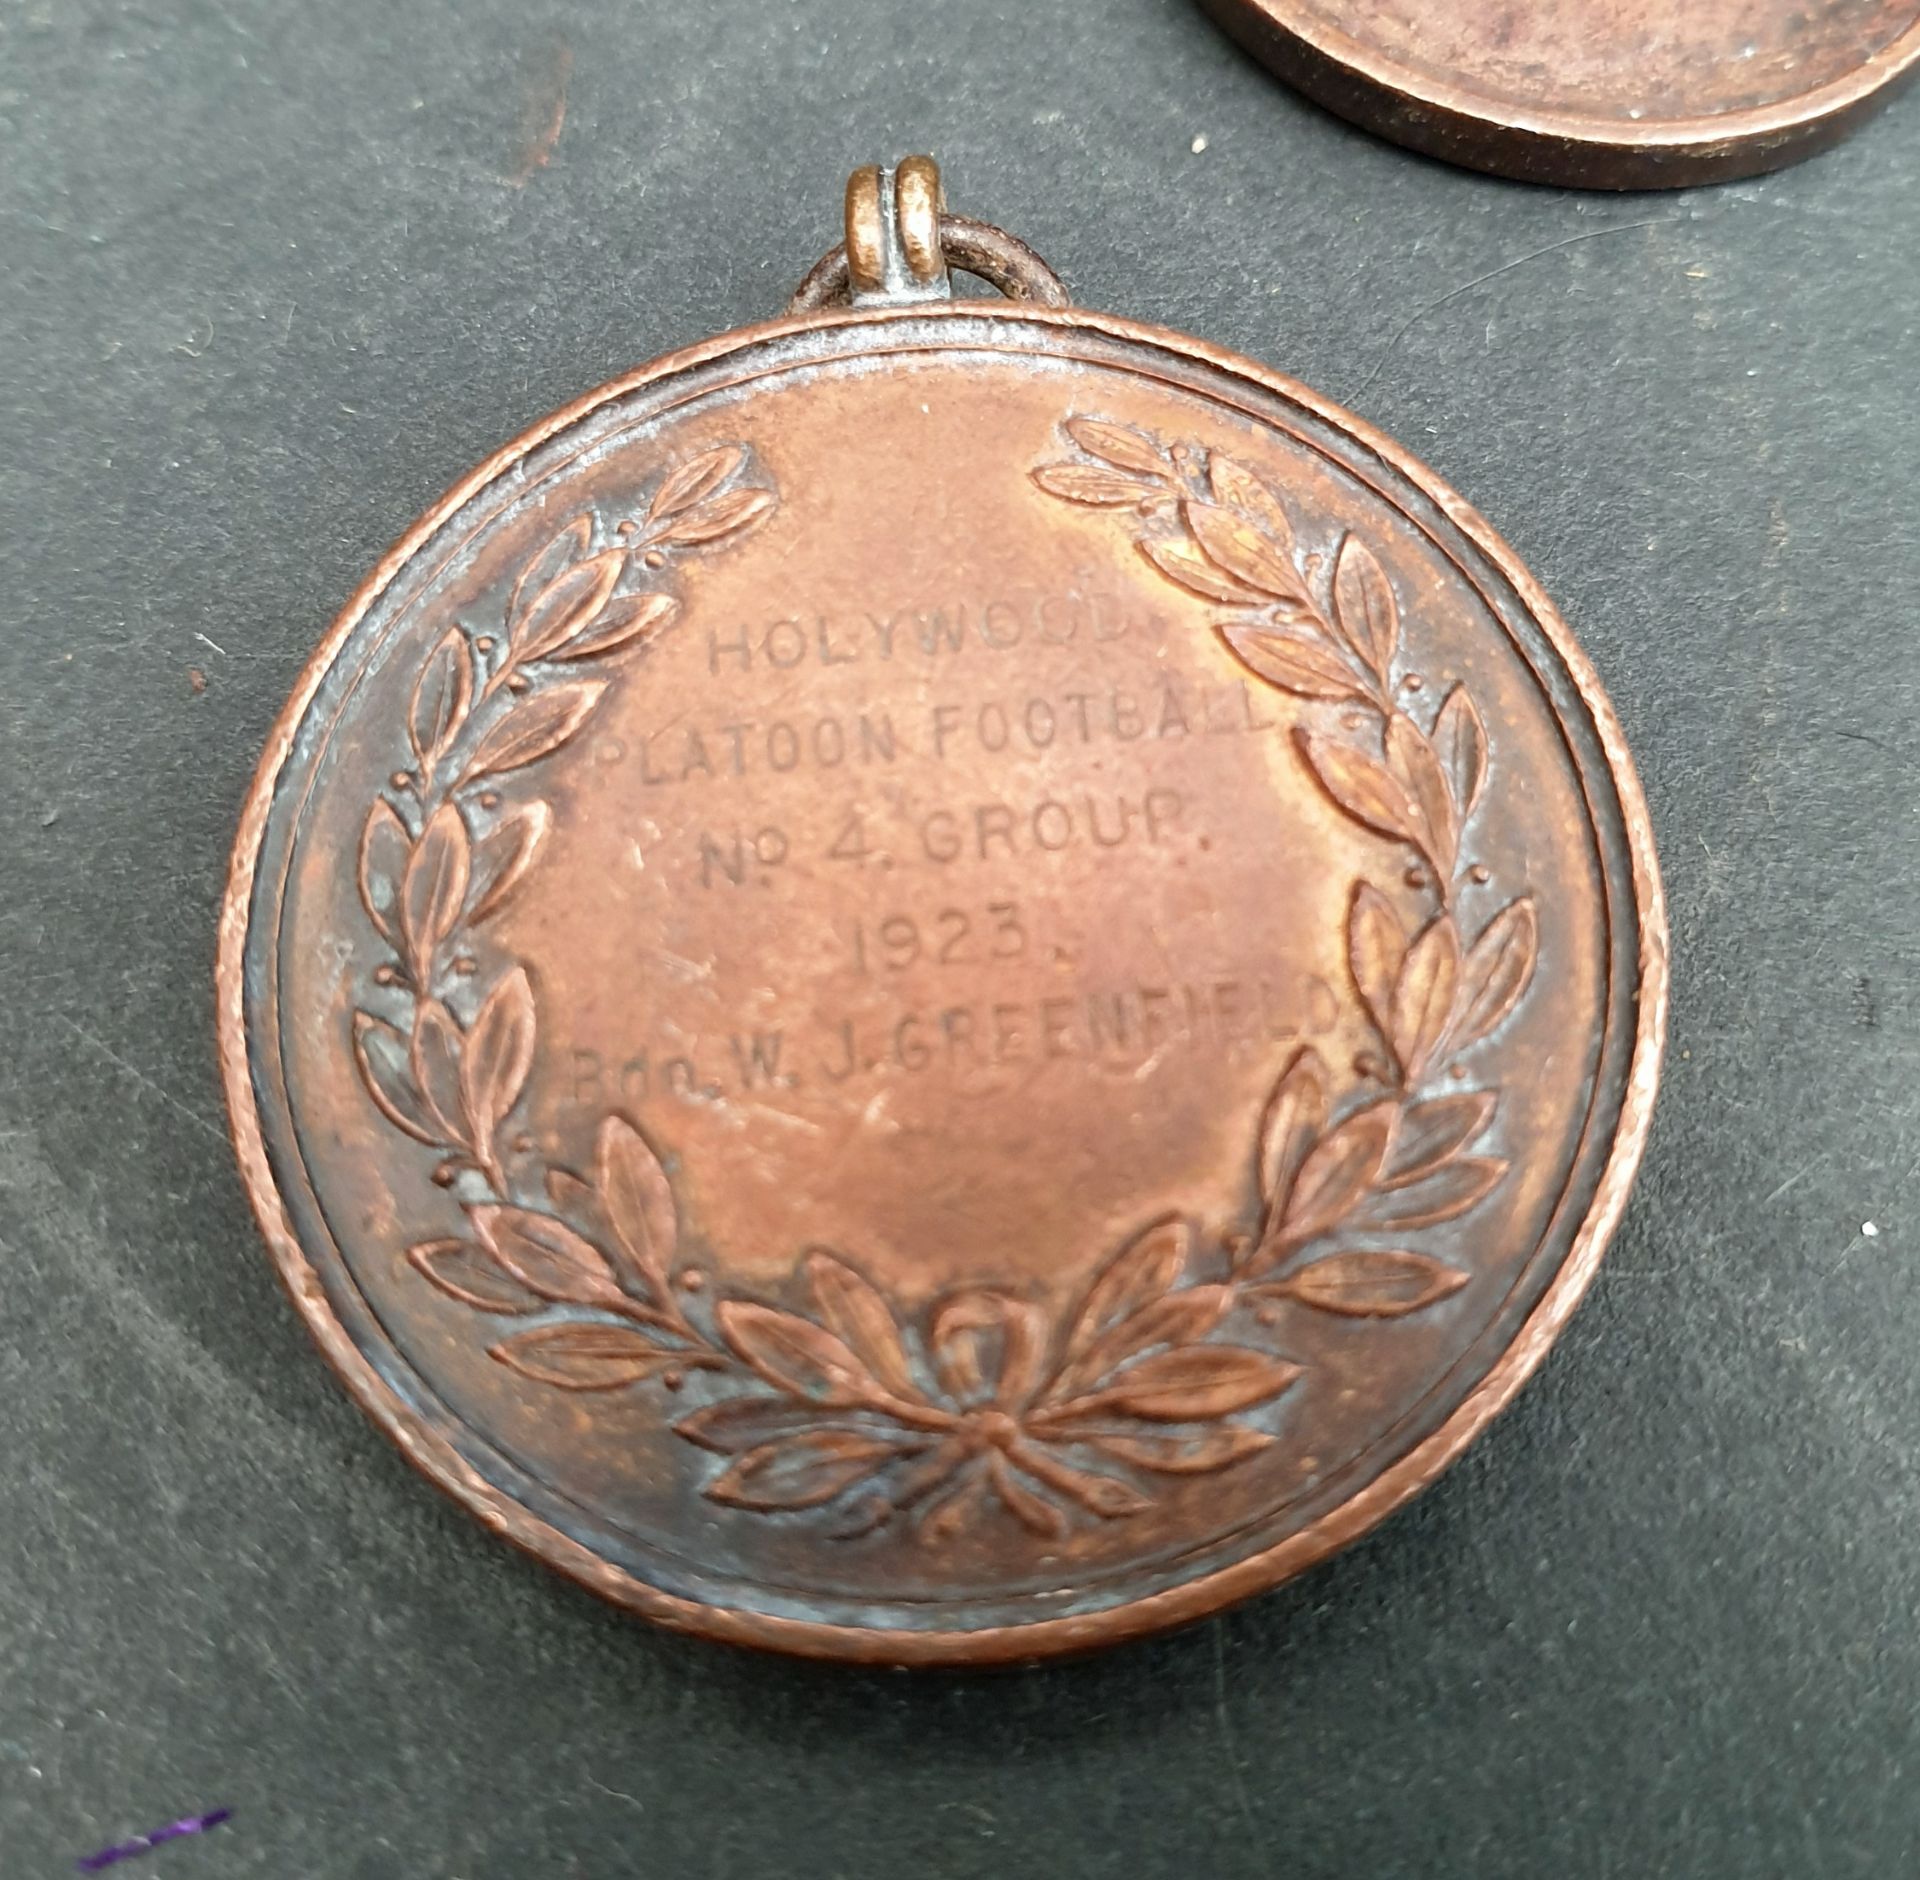 Antique Vintage 5 x Military Royal Navy Sporting and Football Medals 1930's Awarded To Royal Marines - Image 6 of 7